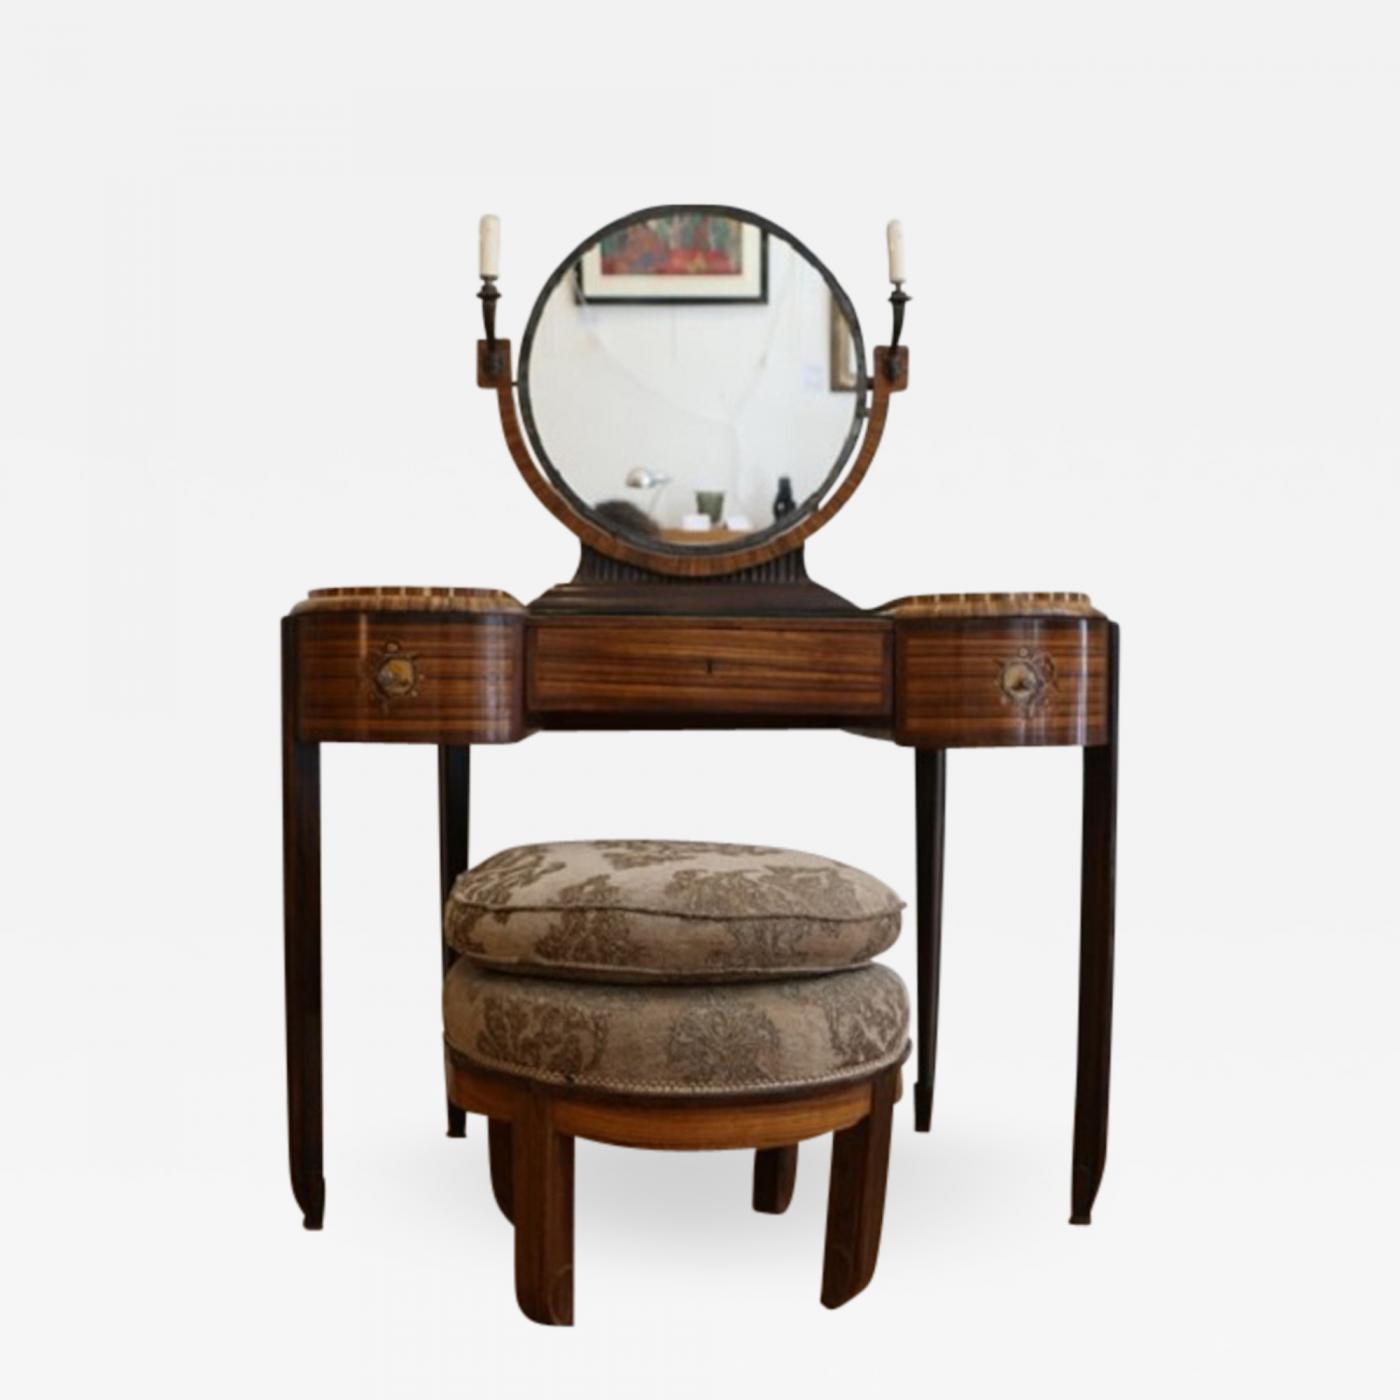 Maison Krieger - Art Deco dressing table with stool by Krieger, circa 